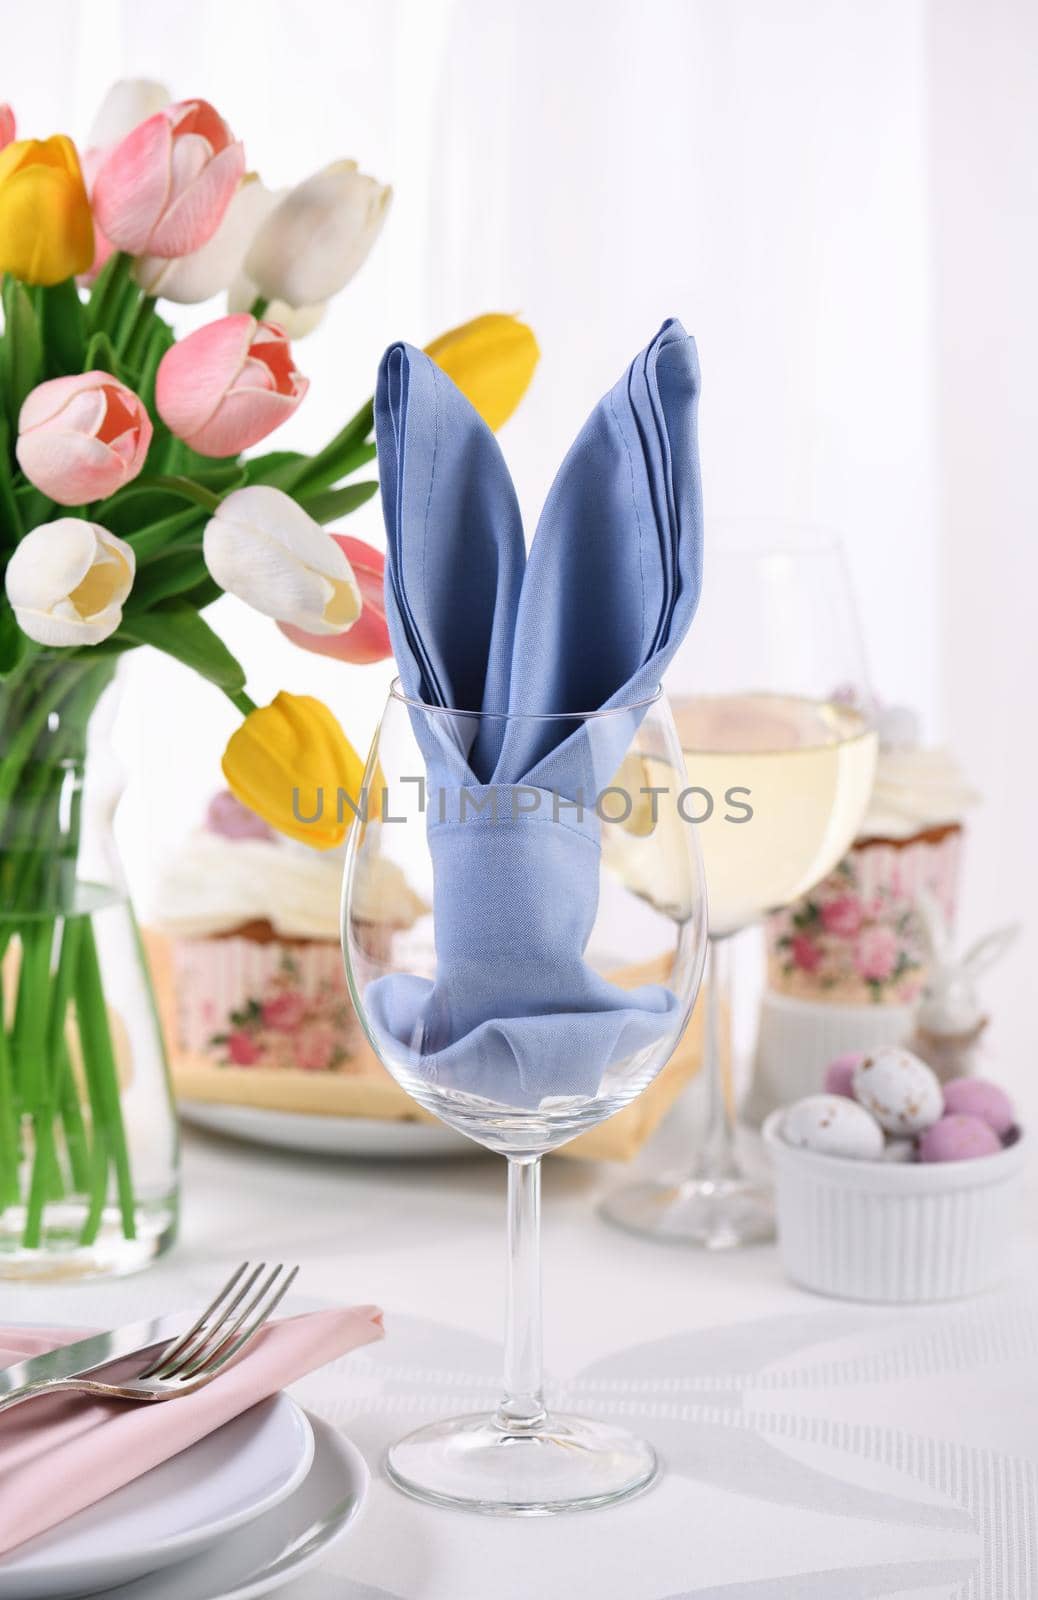 Festive table setting for Easter. by Apolonia